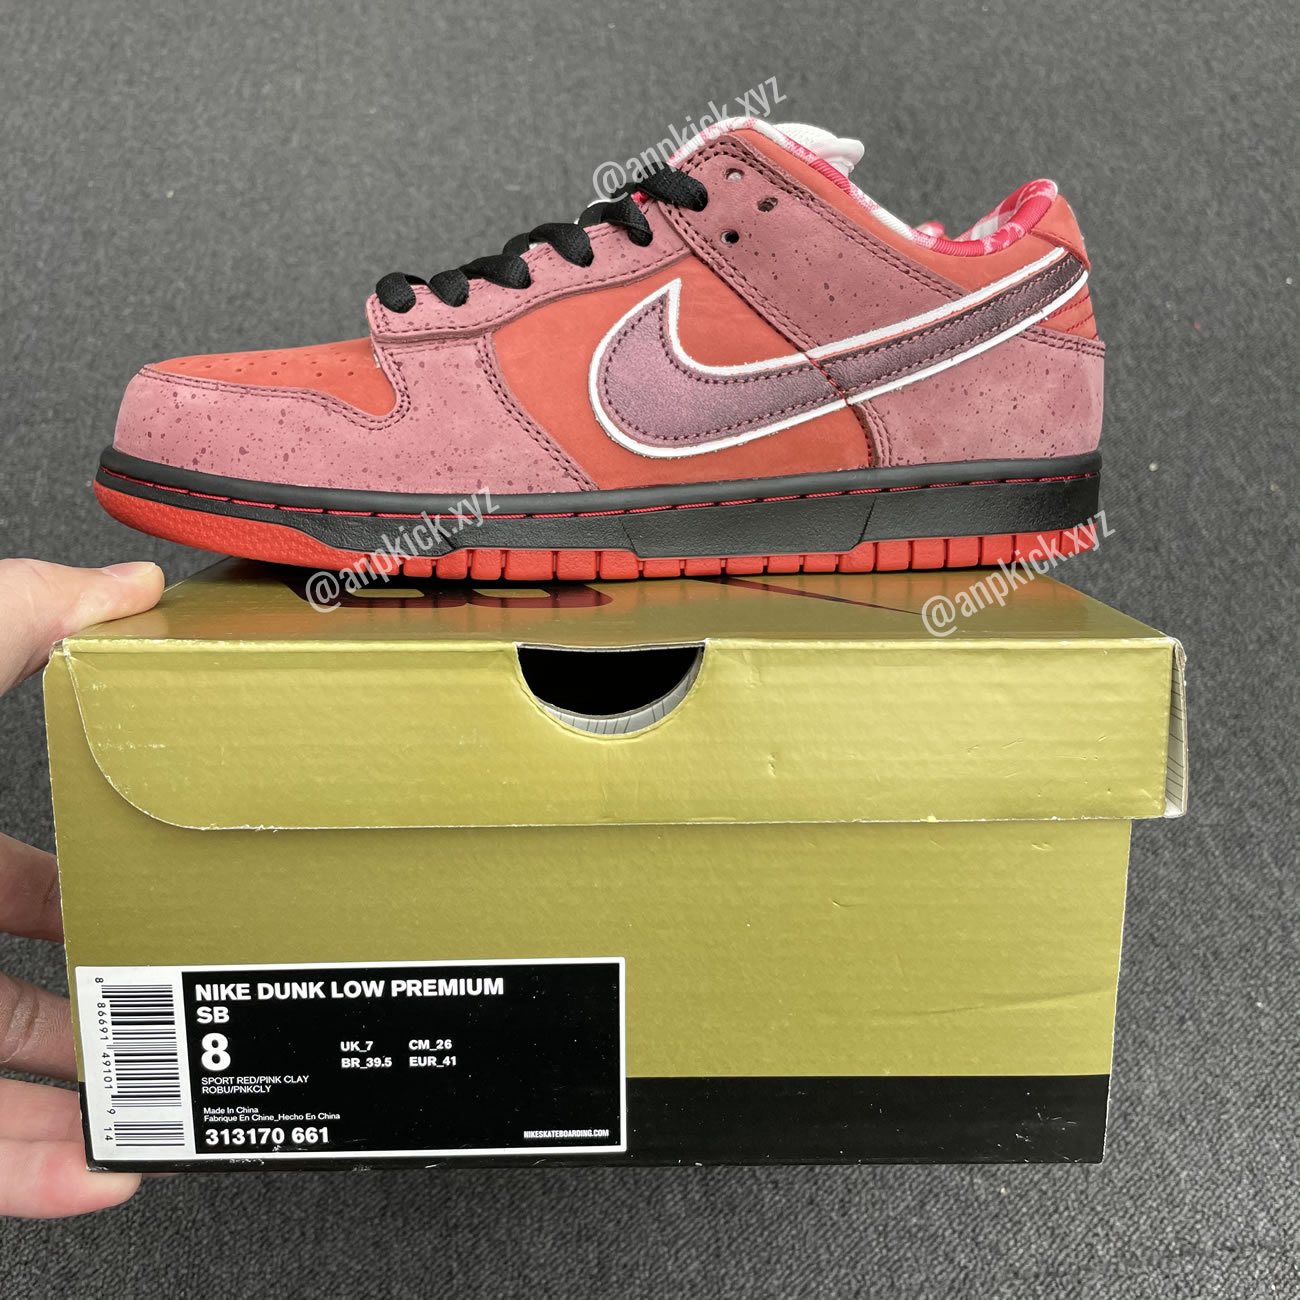 Anpkick Nike Sb Dunk Low Concepts Red Lobster 313170 661 (7) - newkick.org